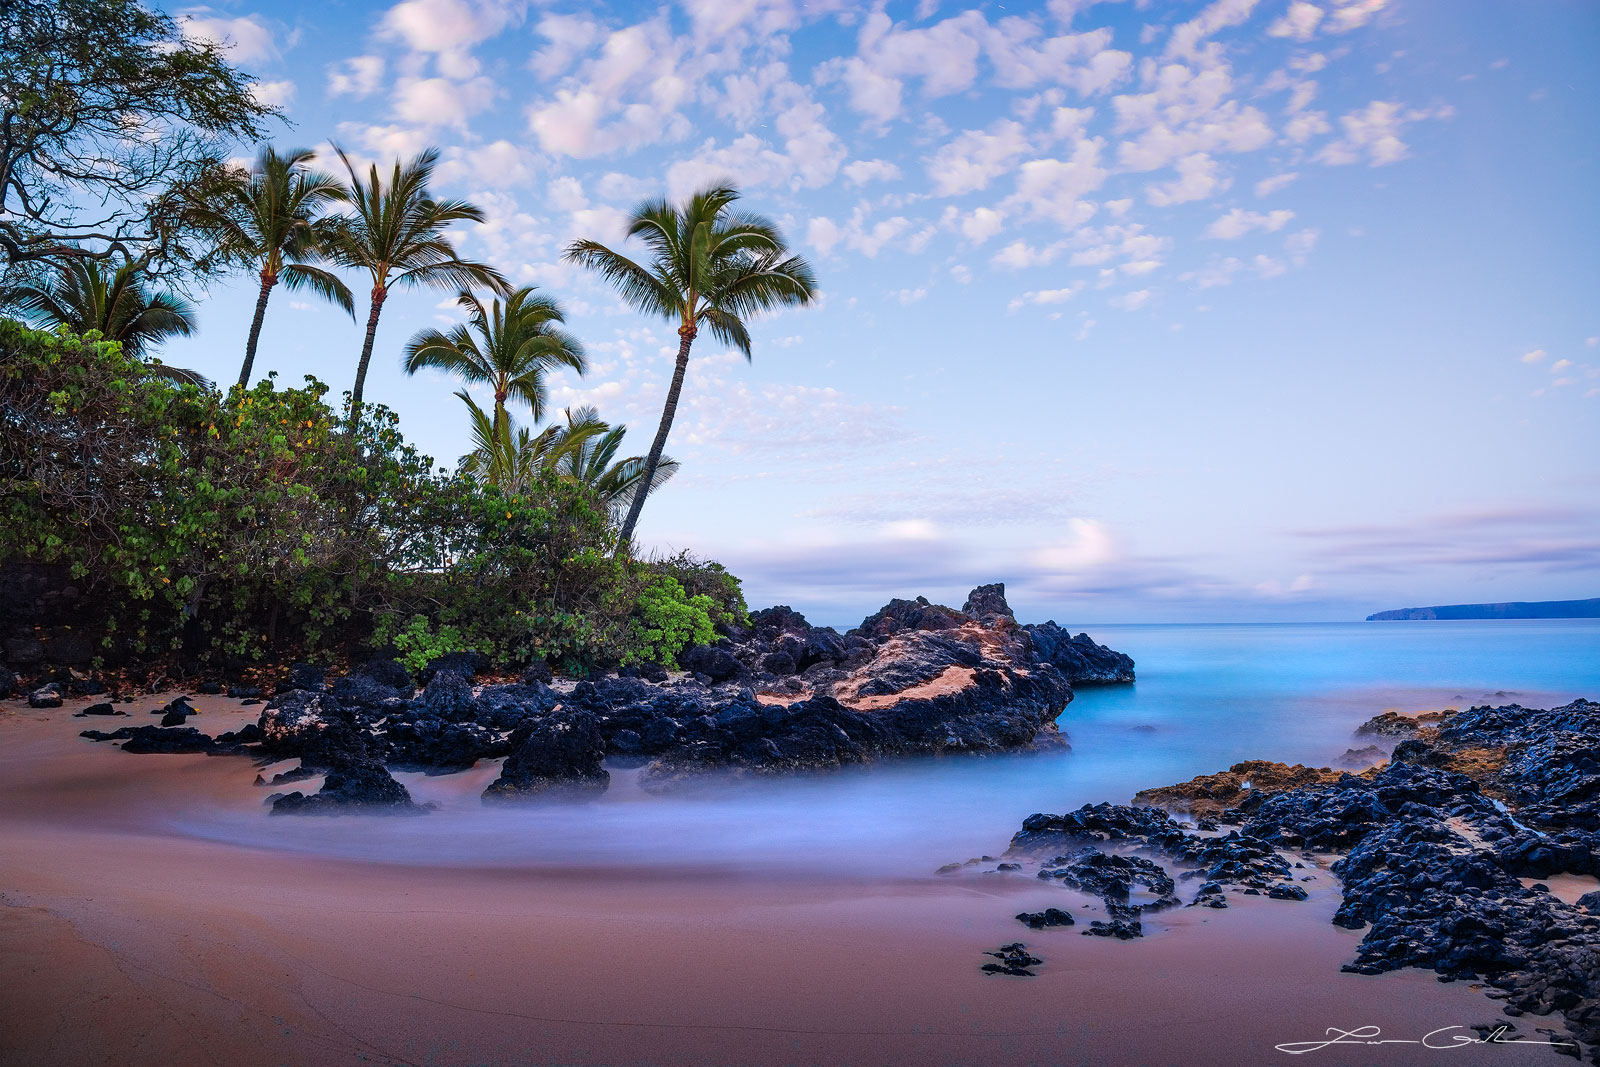 Slow motion, long exposure image of a secluded rocky beach in Hawaii, featuring an ethereal mist-like ocean, sand, lava rocks, palm trees, and a tranquil morning sky - Gintchin Fine Art.